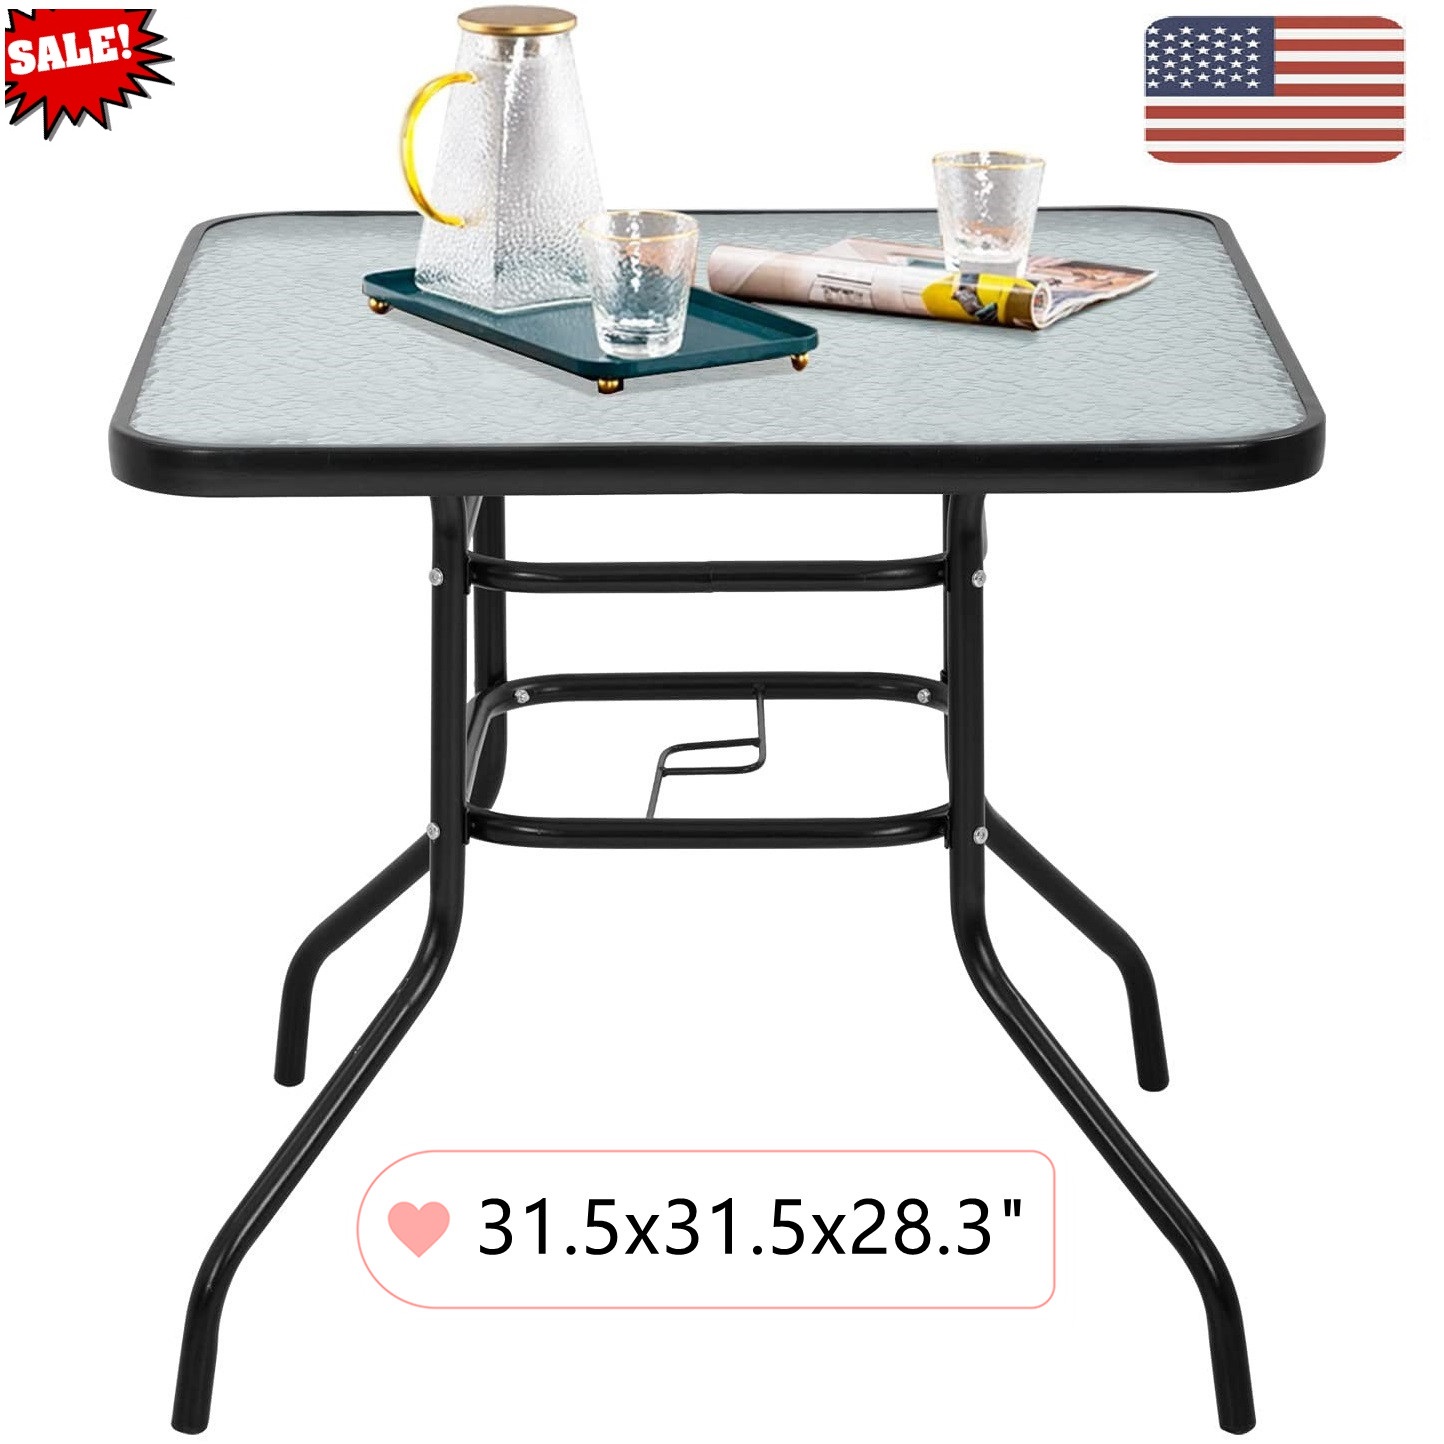 Goorabbit Outdoor Dining Table Two Shape Garden Patio Furniture Side Table Outdoor Bistro Glass Top Yard,Black - image 1 of 8